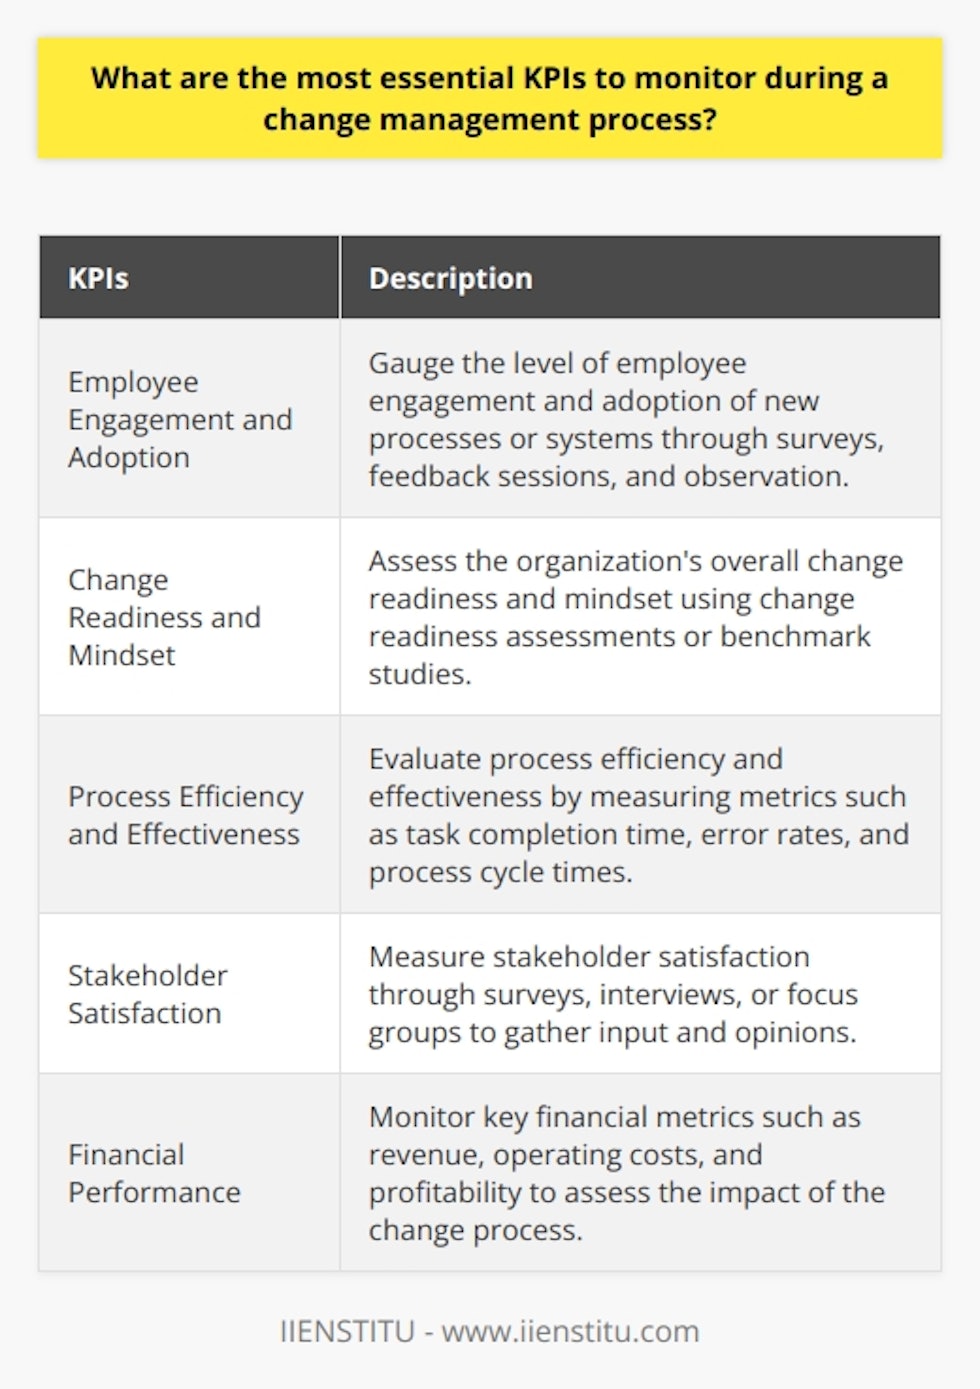 Key Performance Indicators (KPIs) are crucial for monitoring and evaluating the success of a change management process. By measuring specific metrics, organizations can gain valuable insights into the progress and effectiveness of the change initiative. Here are some of the most essential KPIs that should be monitored during a change management process:1. Employee Engagement and Adoption: It is important to gauge the level of employee engagement and adoption of the new processes or systems being implemented. Surveys, feedback sessions, and observation can be used to measure this. High levels of engagement and adoption suggest that employees are embracing the change and are likely to contribute to its success.2. Change Readiness and Mindset: Assessing the organization's overall change readiness and mindset is critical. Change readiness assessments or benchmark studies can be conducted to measure the organization's adaptability and willingness to adopt new processes or systems. A positive change readiness score indicates that the organization is well-prepared for a successful change implementation.3. Process Efficiency and Effectiveness: Evaluating process efficiency and effectiveness is essential to determine the success of the changes being made. Metrics such as time taken to complete specific tasks, error rates, and process cycle times can be used to measure this. Improvements in these metrics indicate that the changes are having a positive impact on the organization's operations.4. Stakeholder Satisfaction: Measuring stakeholder satisfaction is crucial when implementing change. Surveys, interviews, or focus groups can be conducted to gather input and opinions from stakeholders regarding the change initiative. High levels of stakeholder satisfaction suggest that the change is being well-received and aligning with stakeholder expectations.5. Financial Performance: Monitoring the organization's financial performance during the change management process is vital. Key financial metrics such as revenue, operating costs, and profitability should be considered. Significant positive changes in these areas indicate that the change management process has had a positive influence on the organization's bottom line.In summary, monitoring KPIs such as employee engagement and adoption, change readiness and mindset, process efficiency and effectiveness, stakeholder satisfaction, and financial performance is crucial during a change management process. These KPIs provide valuable insights into the progress and effectiveness of the change initiative, enabling organizations to make data-driven decisions and adjustments to ensure a successful transition.